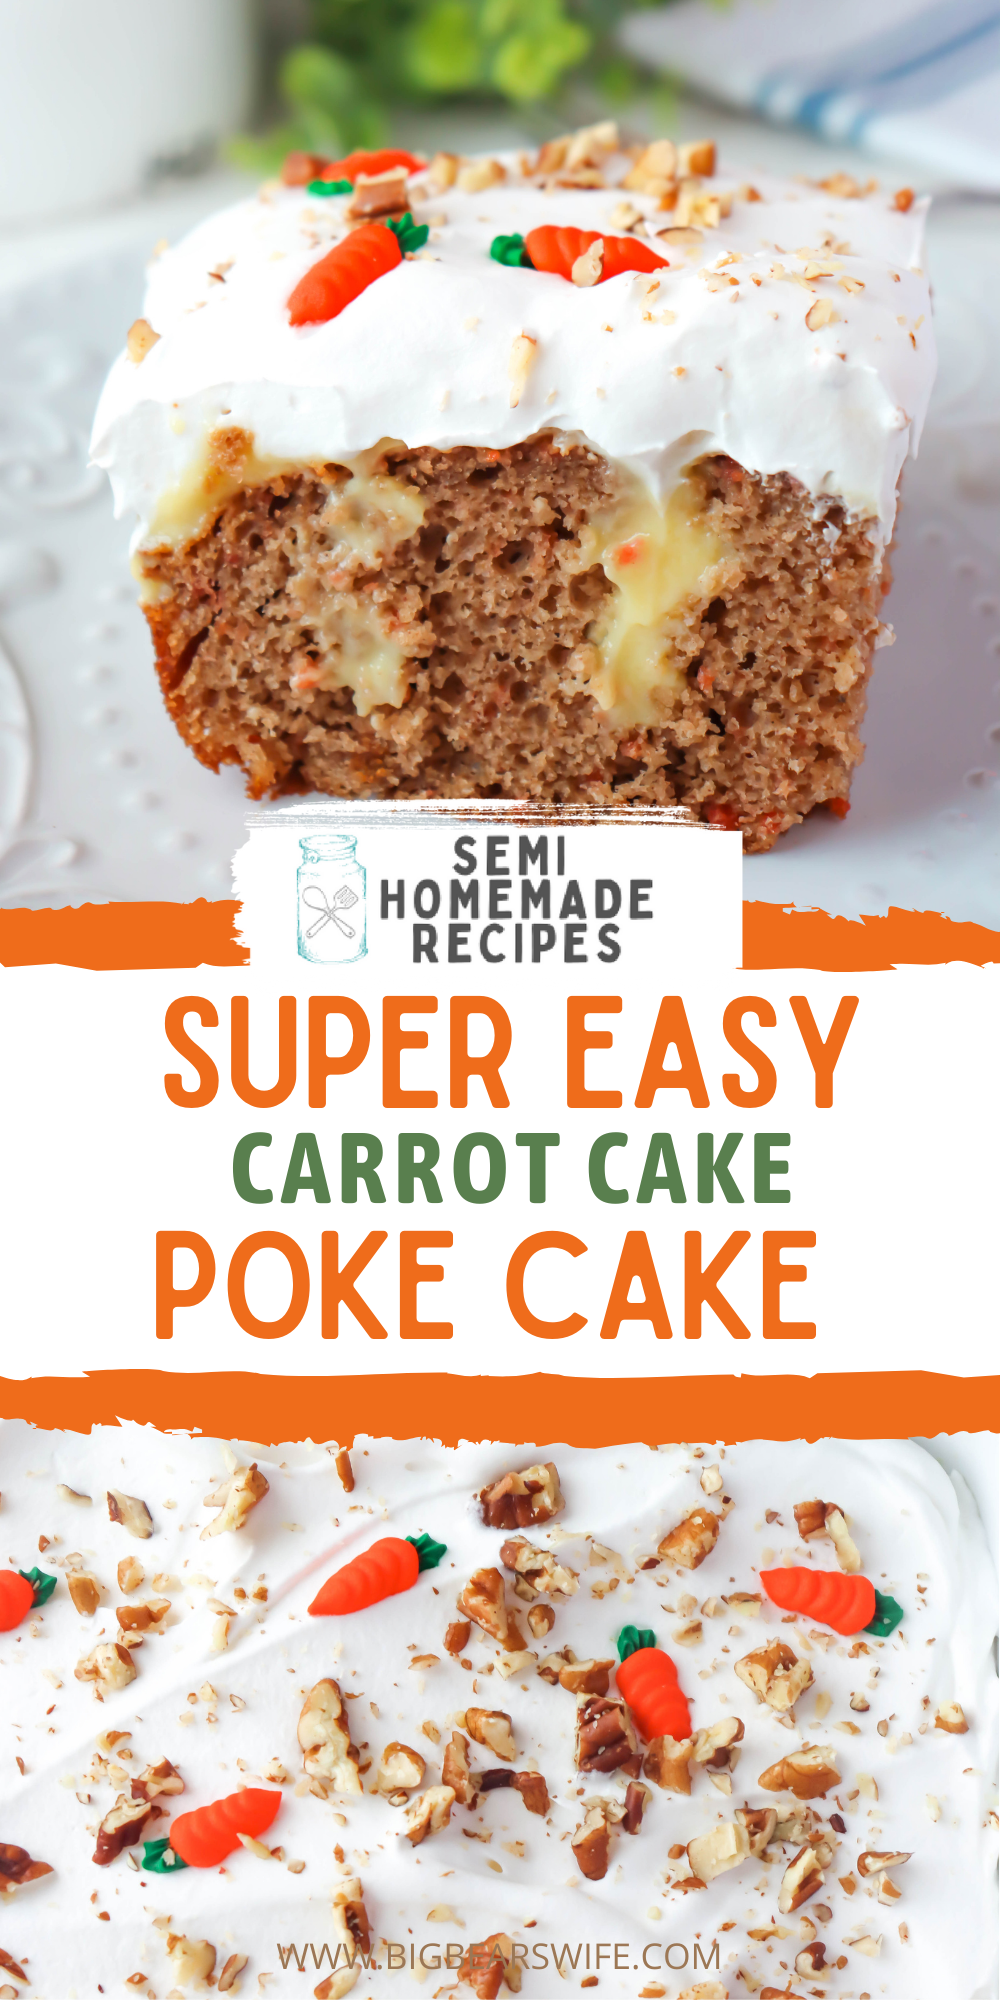 This super easy carrot poke cake is made with a tender carrot cake, vanilla pudding, whipped topping and decorated with the cutest little royal icing carrots and crushed pecans. Don't like pecans? Leave them off!